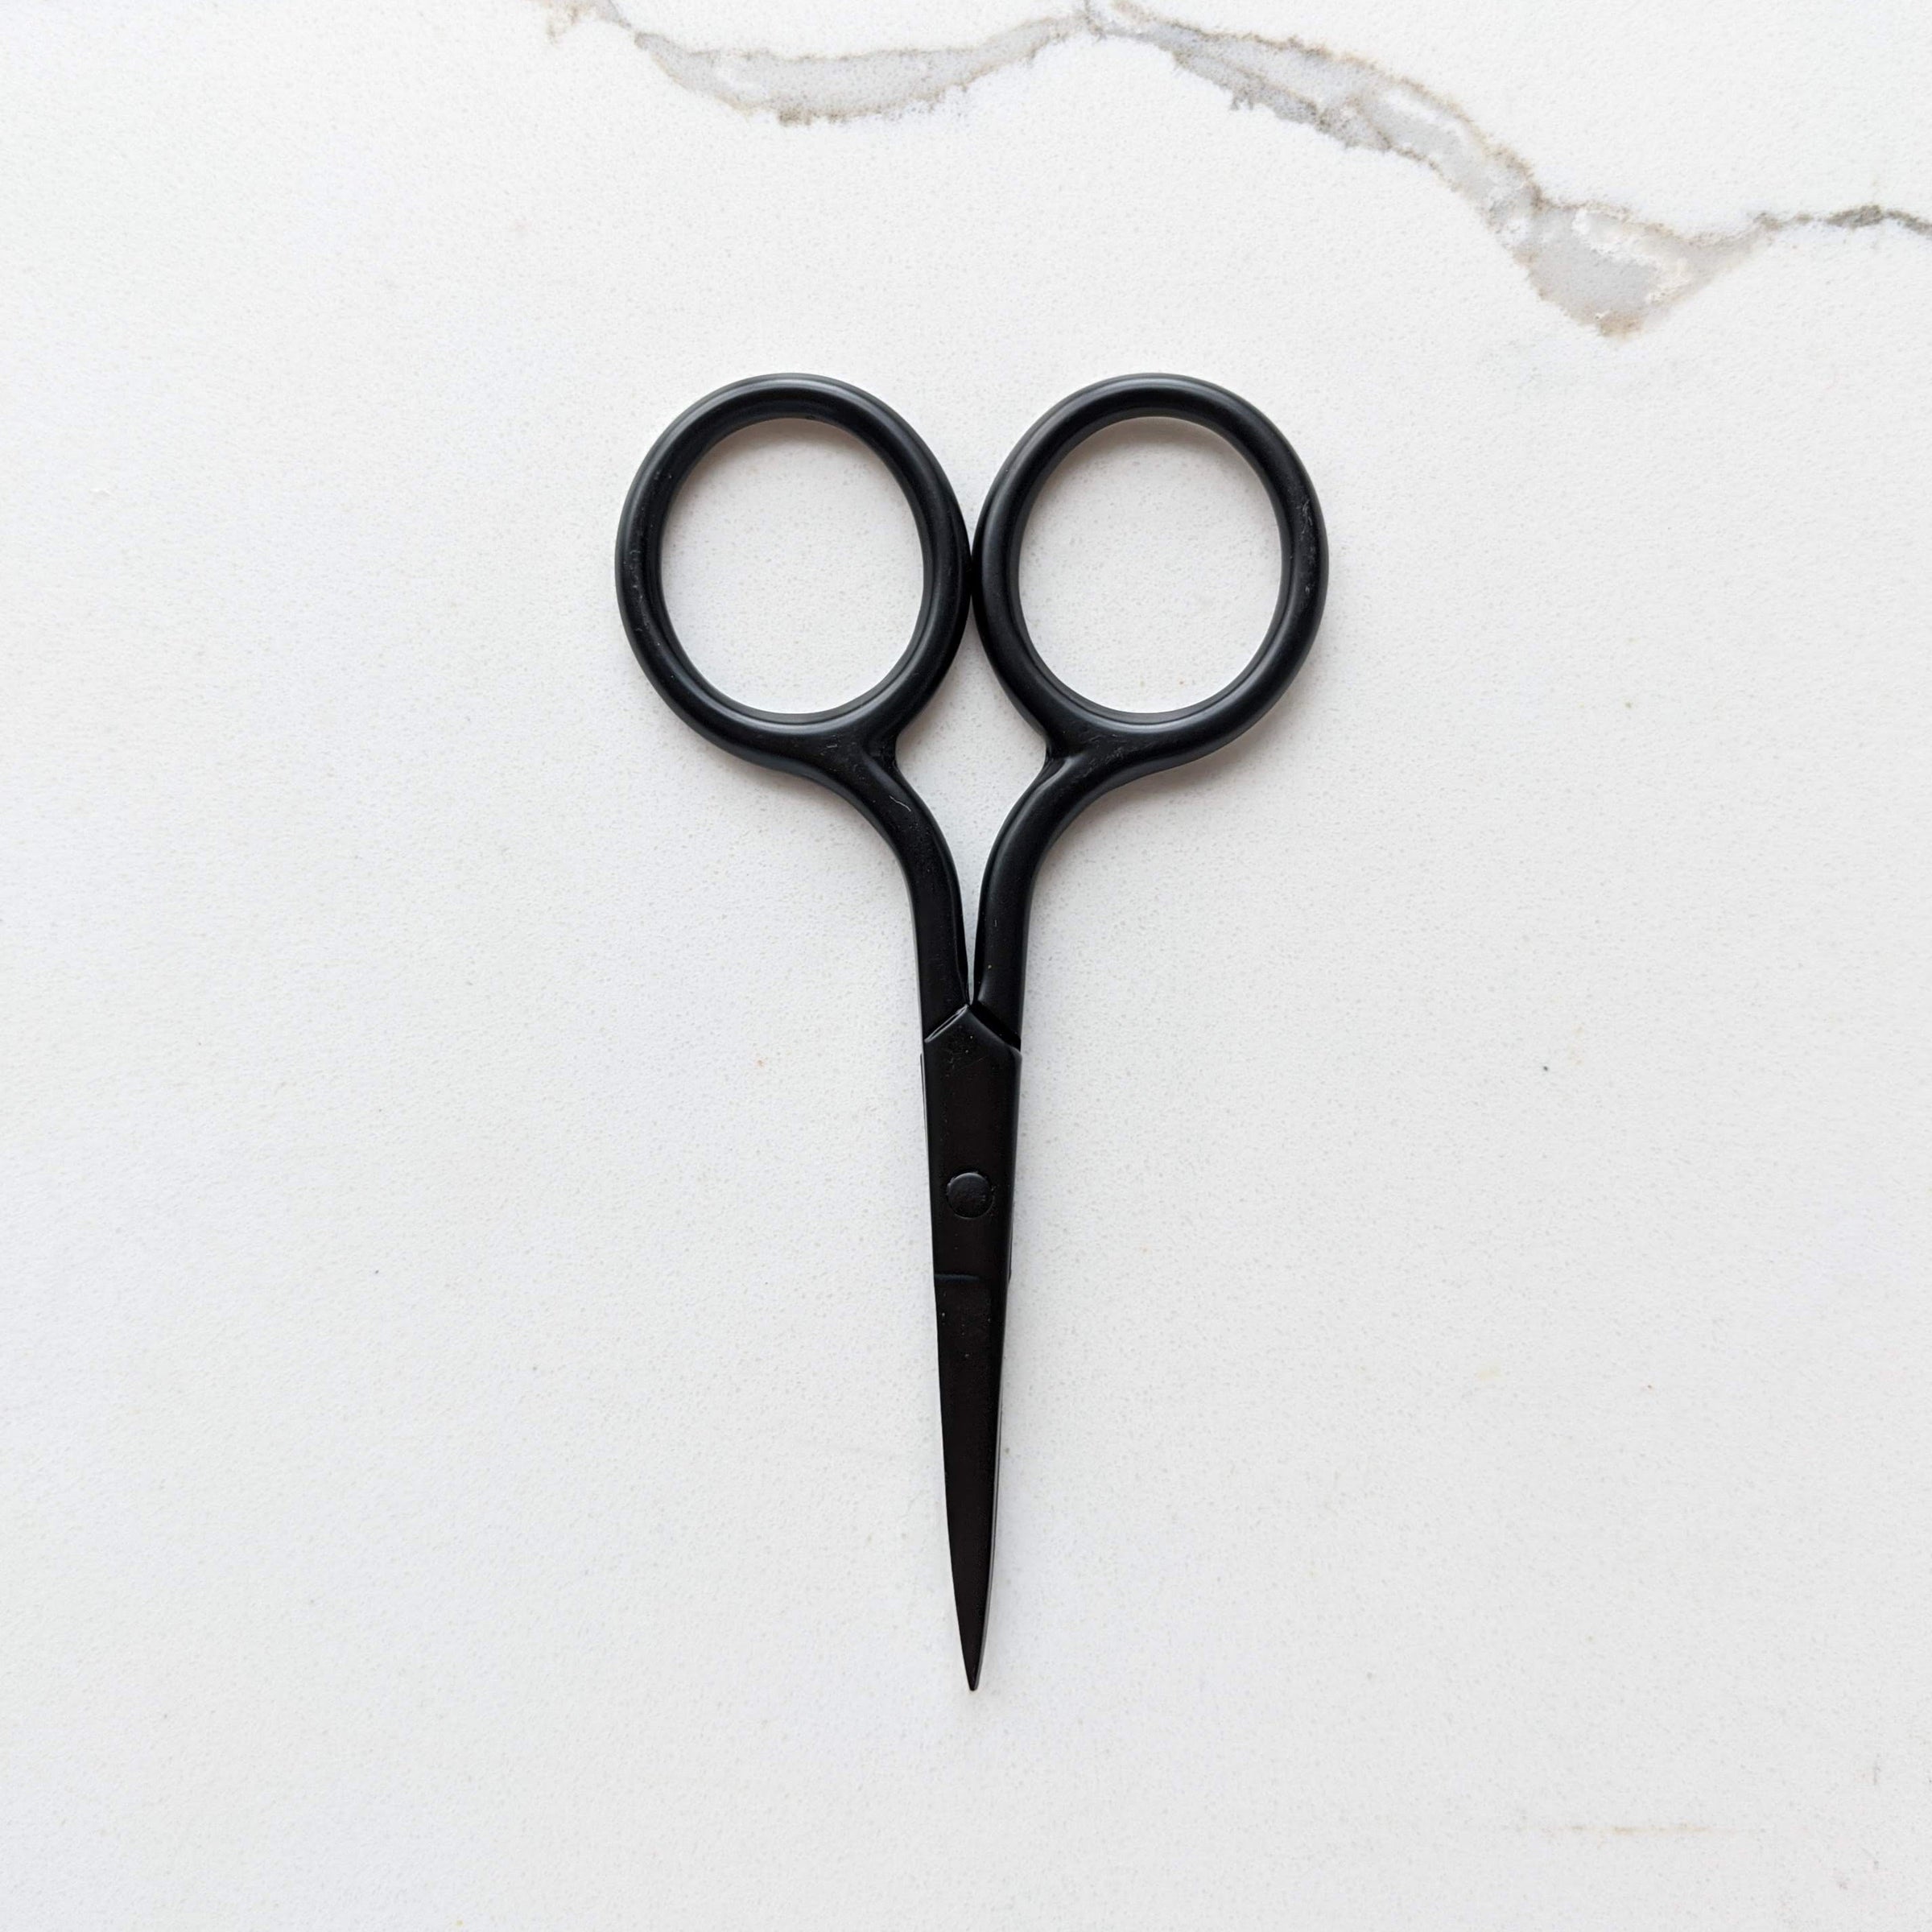 Creativ Mini/fine Embroidery Scissors Sewing Crafts Small Very Sharp Point  Needlework Office Crafts Black -  Denmark